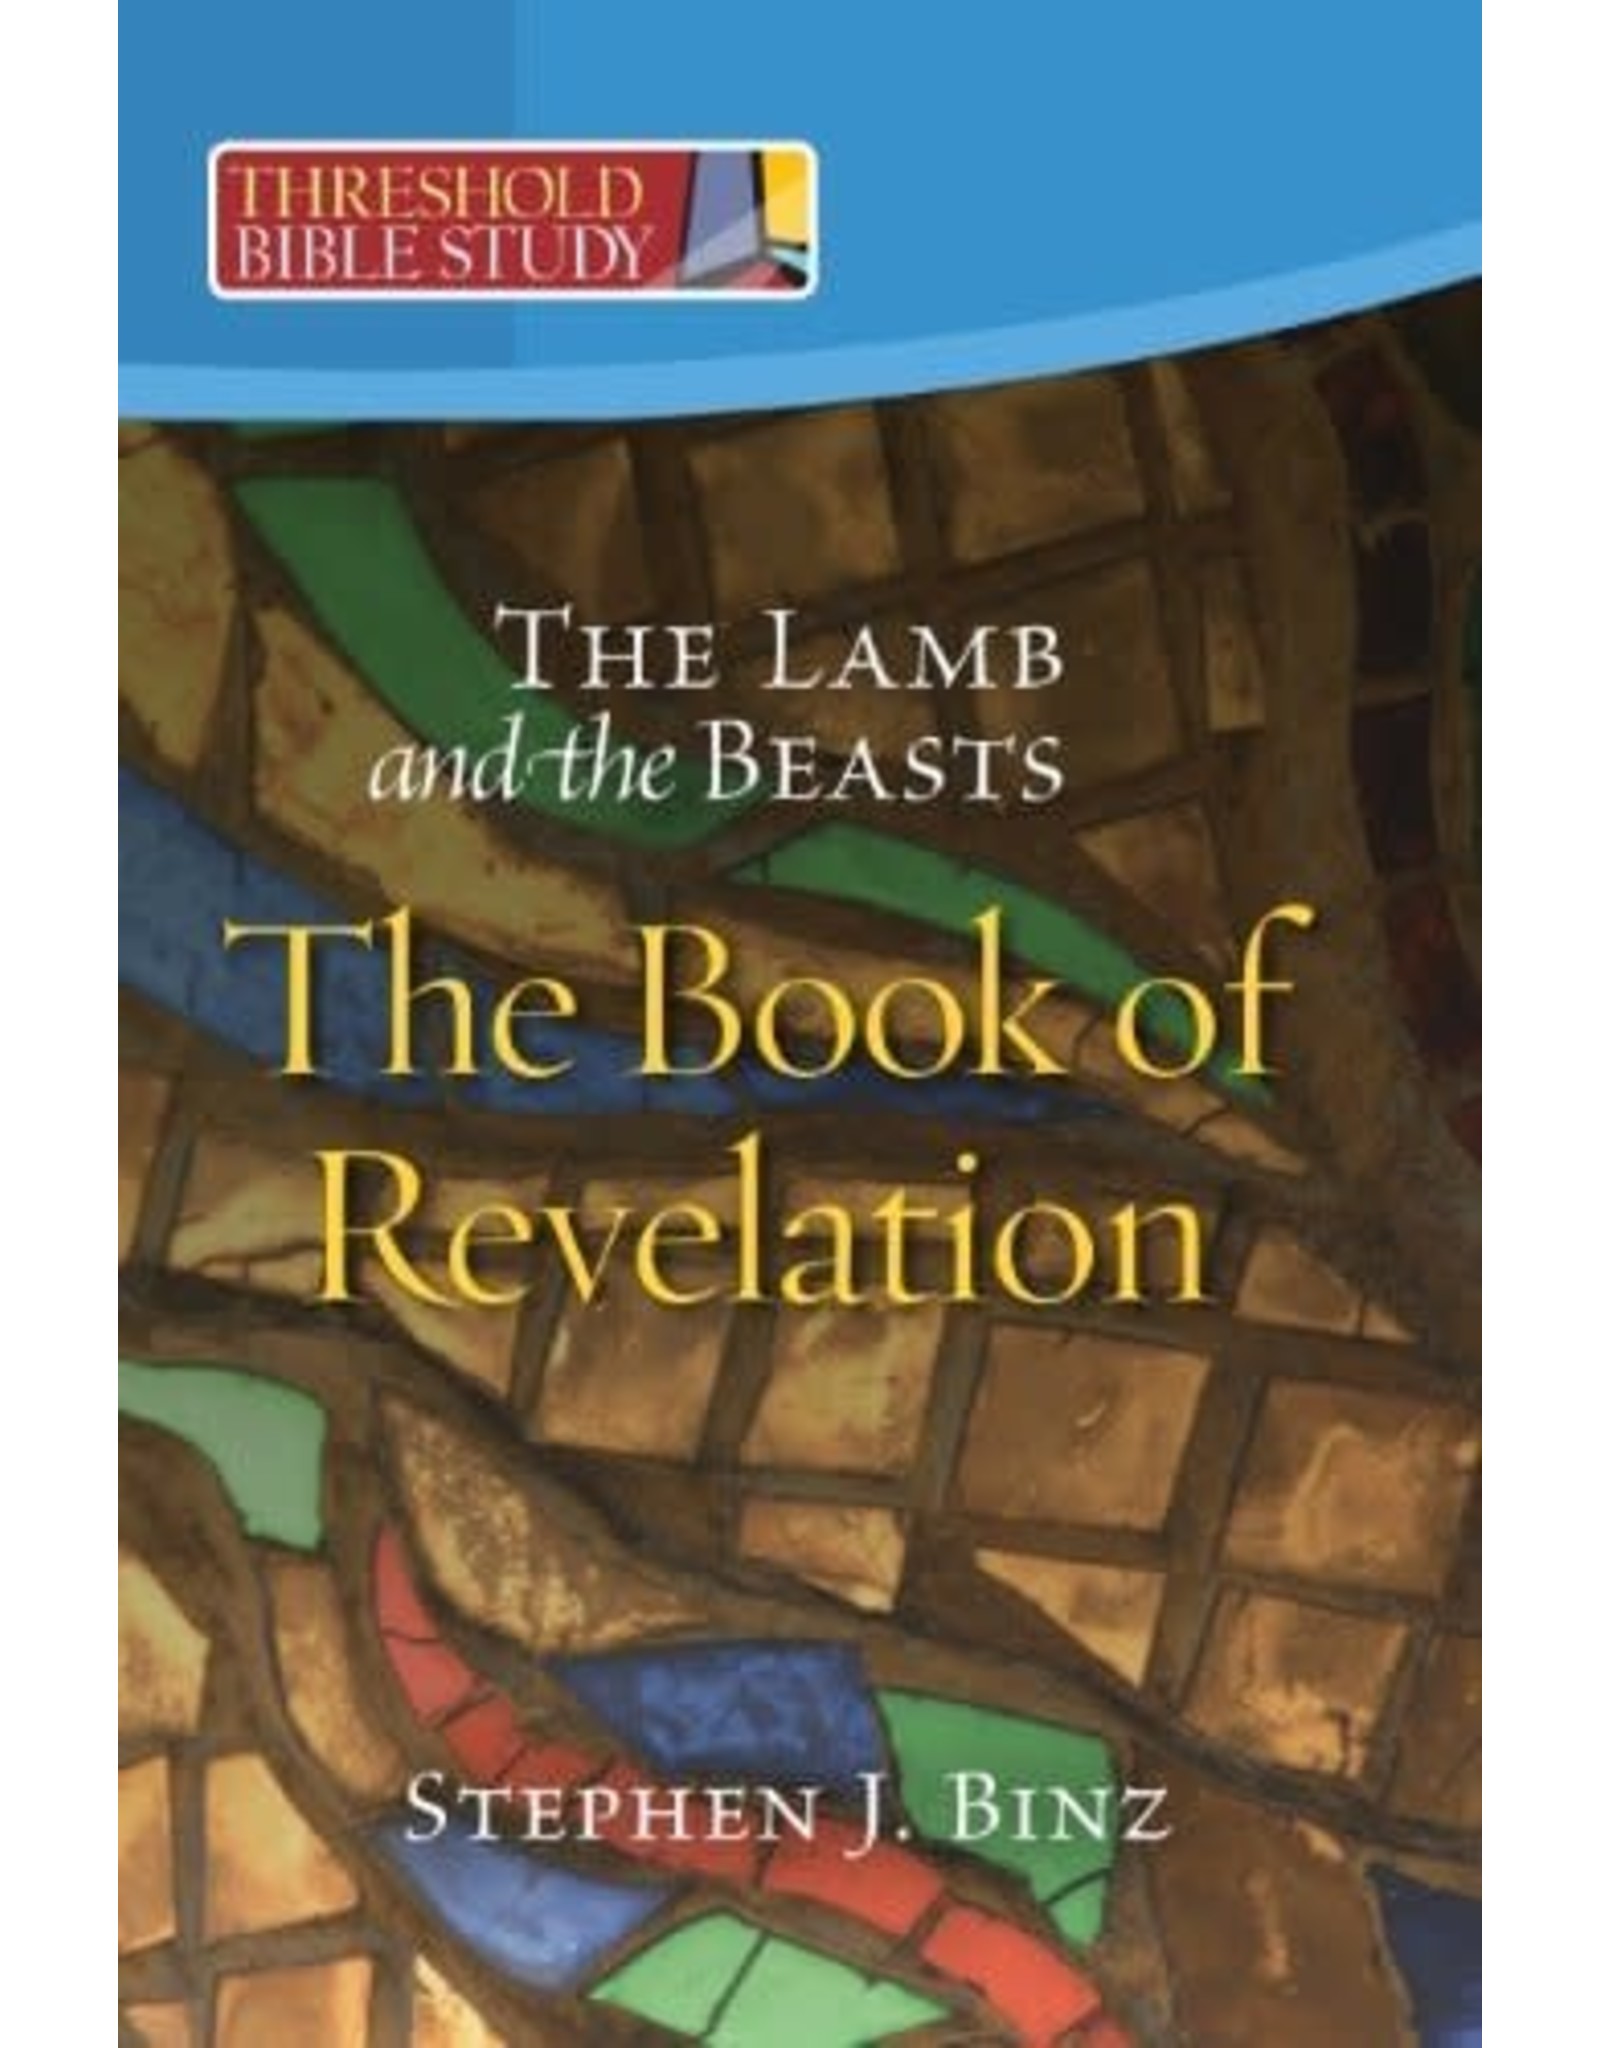 The Book of Revelation: The Lamb and the Beasts (Threshold Bible Study)